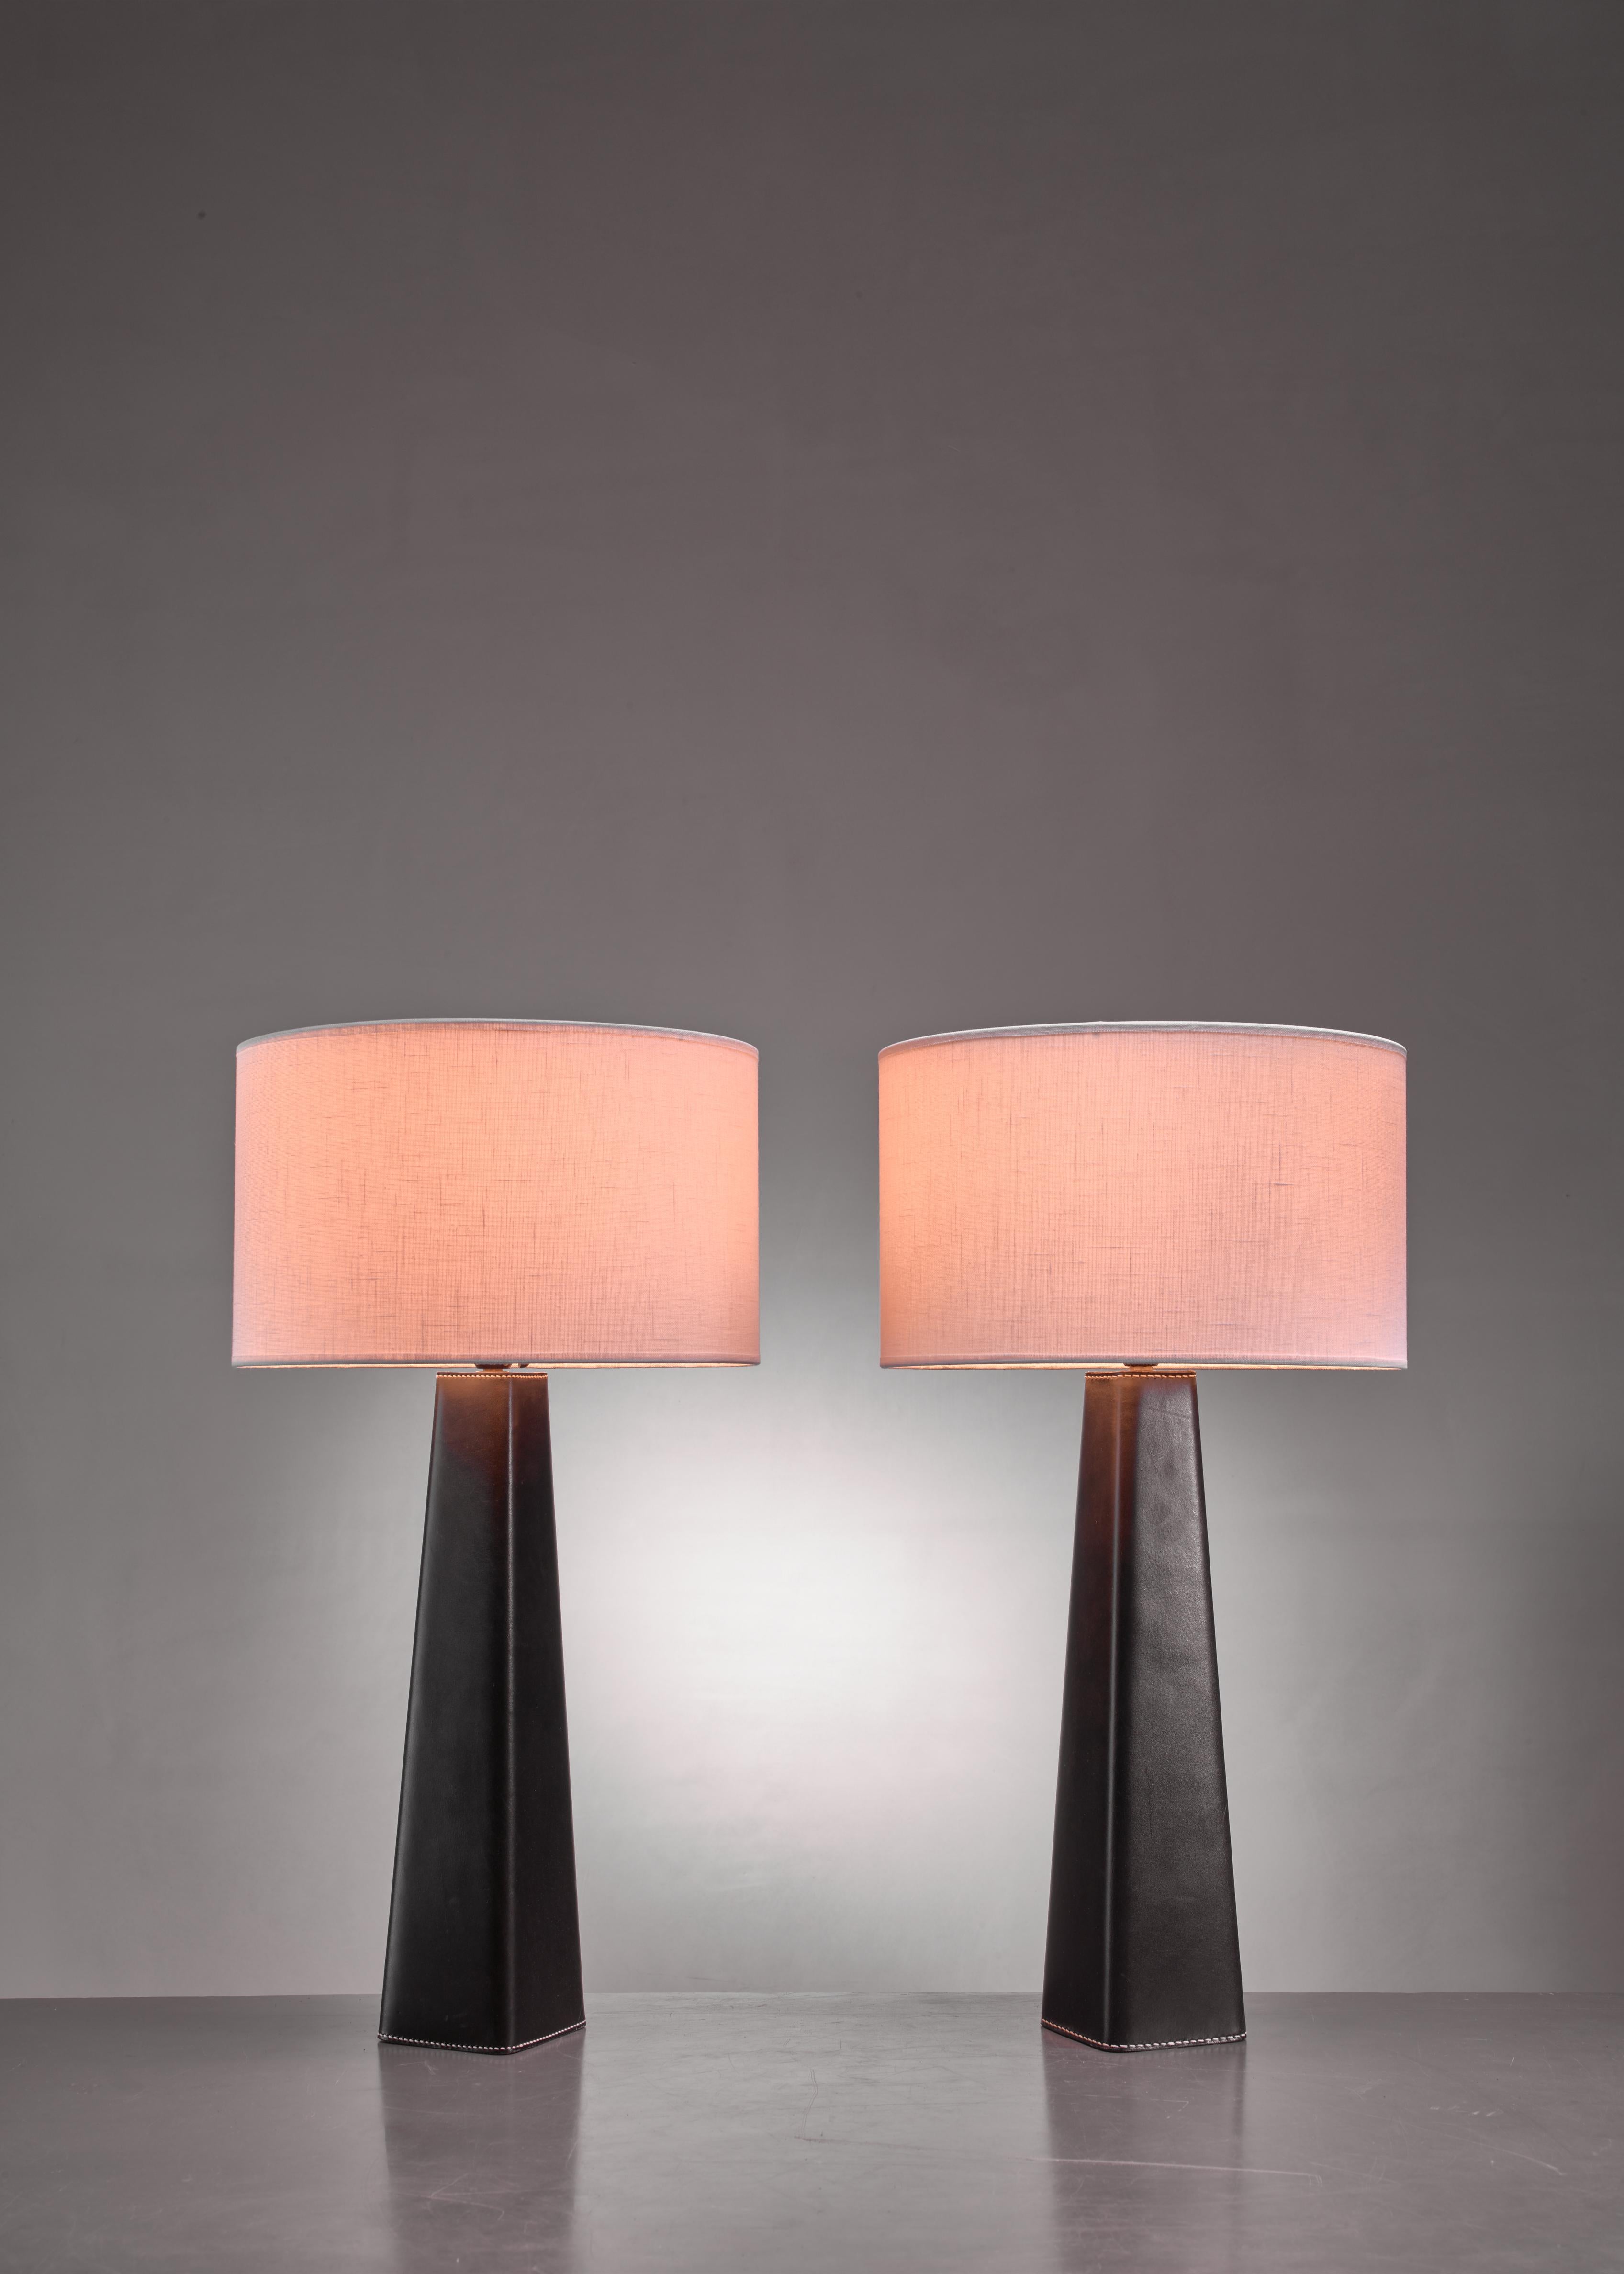 A pair of Scandinavian Modern conical table lamps with a stem wrapped in black, stitched leather.

The measurements and prices stated are of the lamps without a shade.
The shades are newly made and other dimensions and colors are available upon